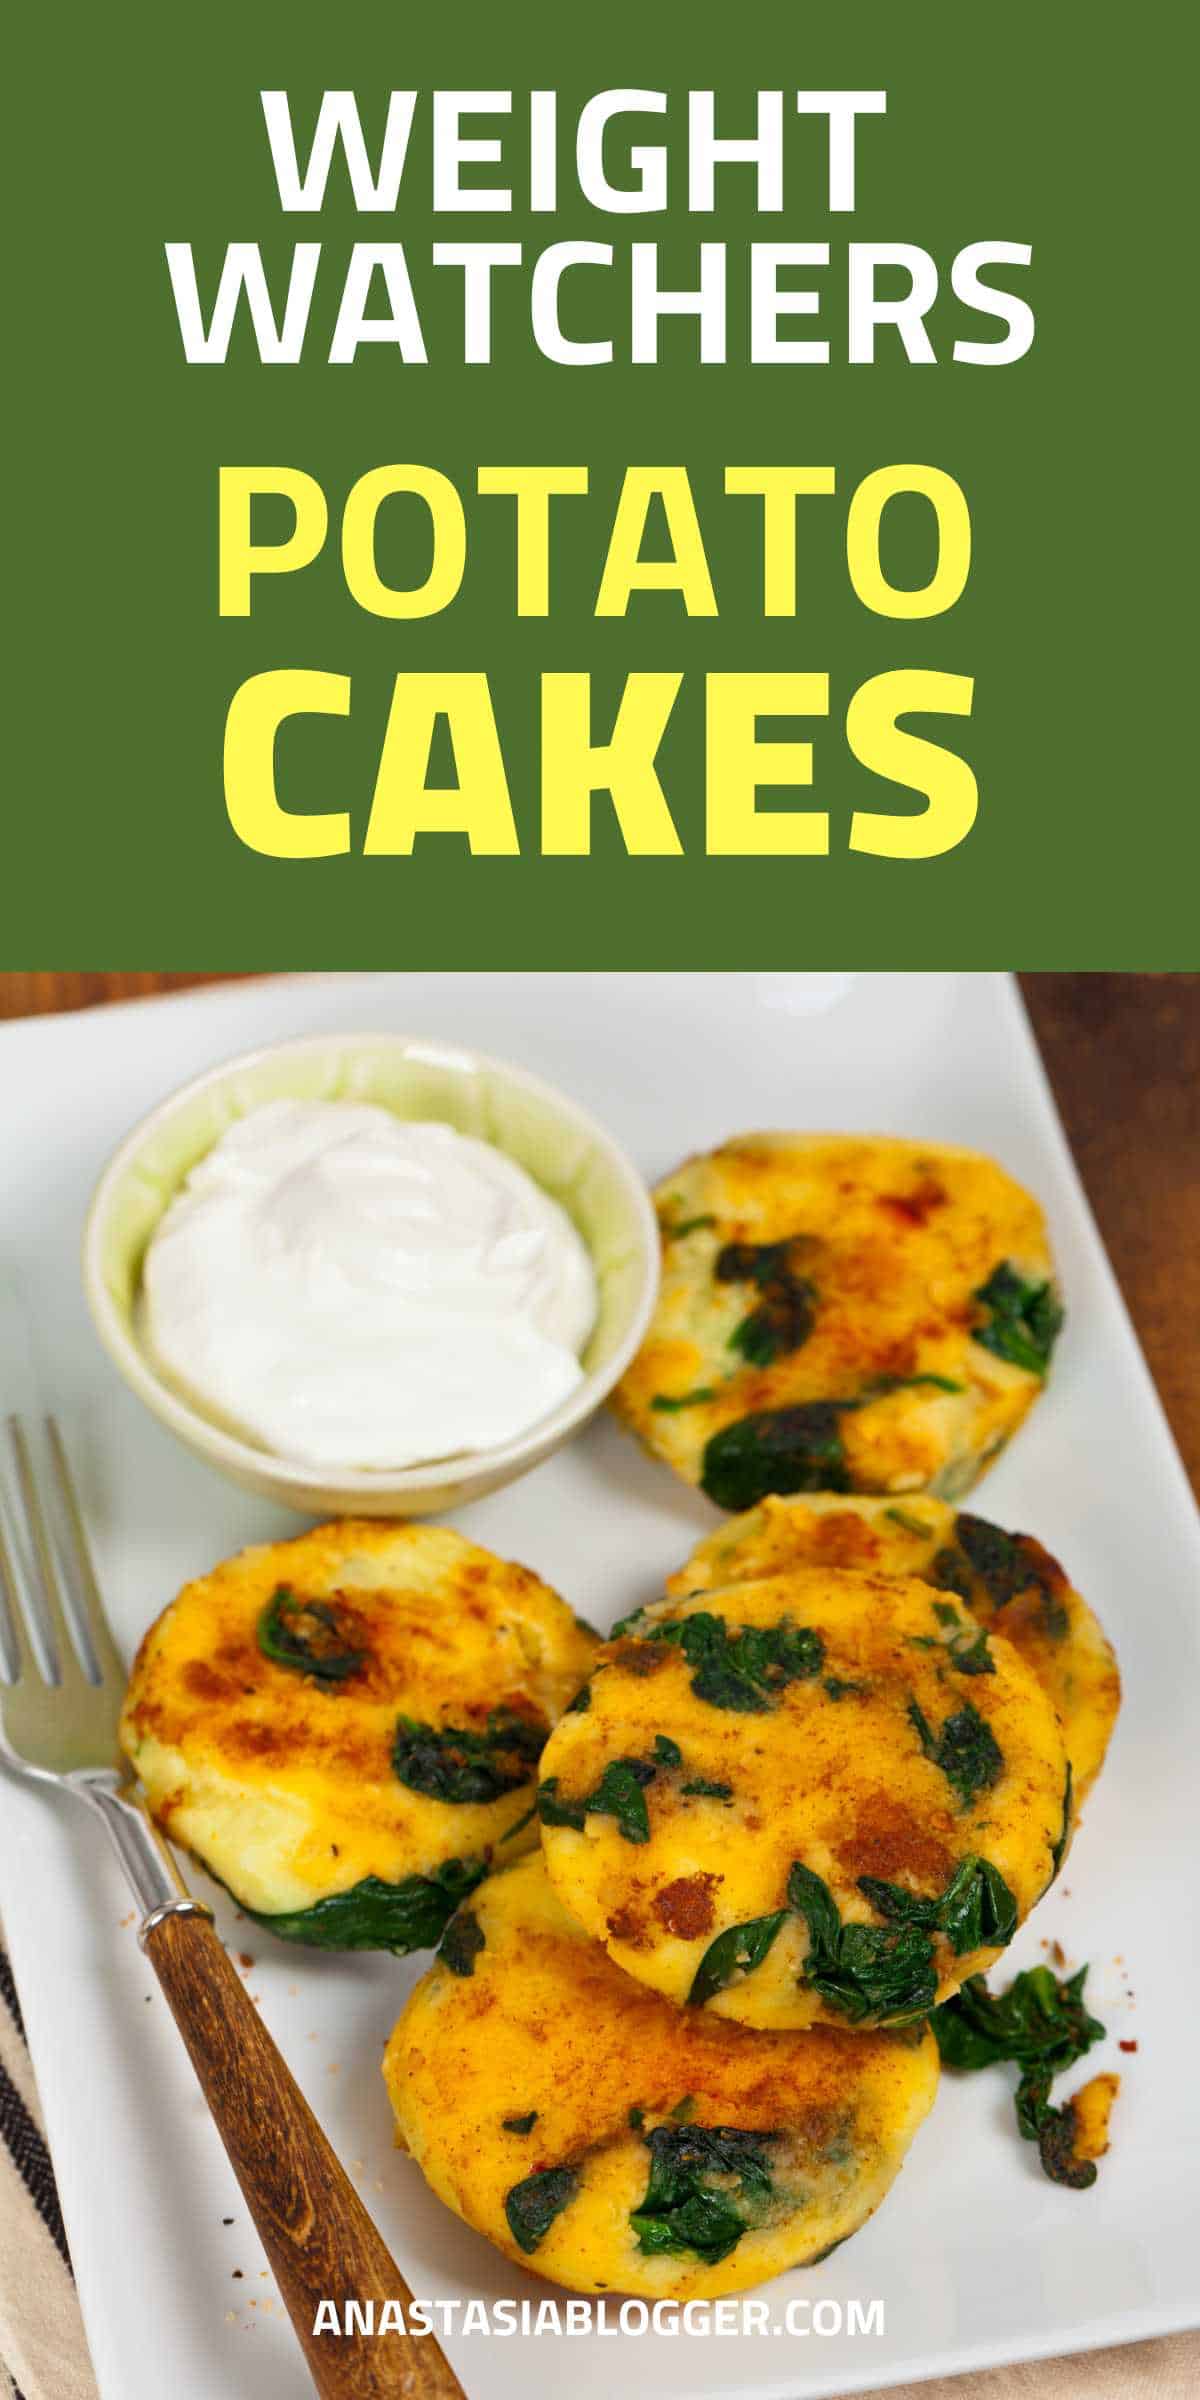 weight watchers potato cakes with spinach